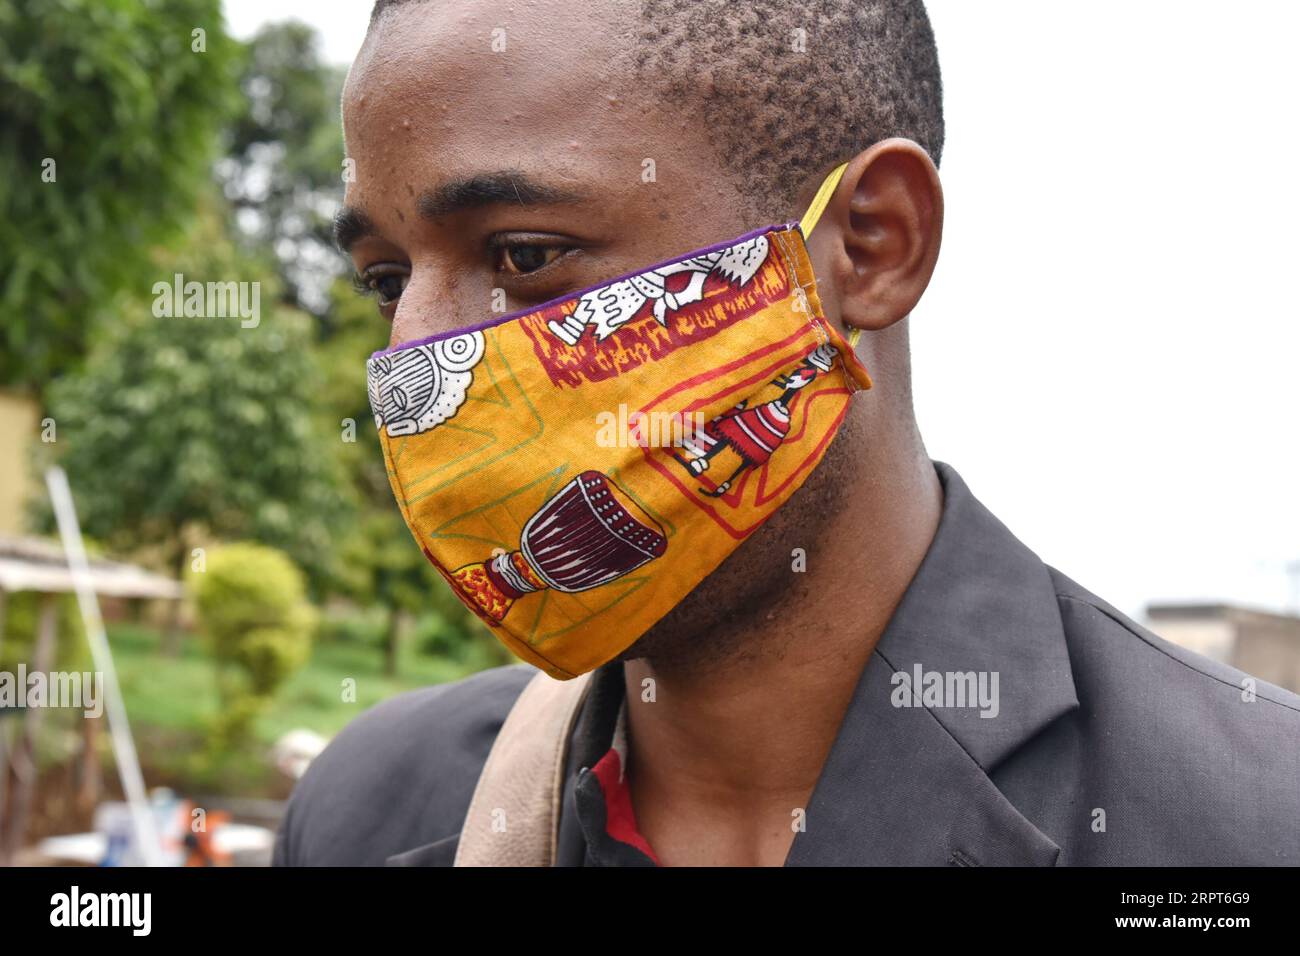 200412 -- YAOUNDE, April 12, 2020 Xinhua -- A man wears a cloth face mask to protect himself against the COVID-19 in Yaounde, Cameroon on April 9, 2020. Recently, the wearing of a protective mask has become mandatory for all Cameroonians wishing to approach certain hospitals and public services, like the General Hospital of Yaounde, and government bodies in the country s southwest region. Photo by Jean Pierre Kepseu/Xinhua CAMEROON-YAOUNDE-COVID-19-FACE MASKS PUBLICATIONxNOTxINxCHN Stock Photo